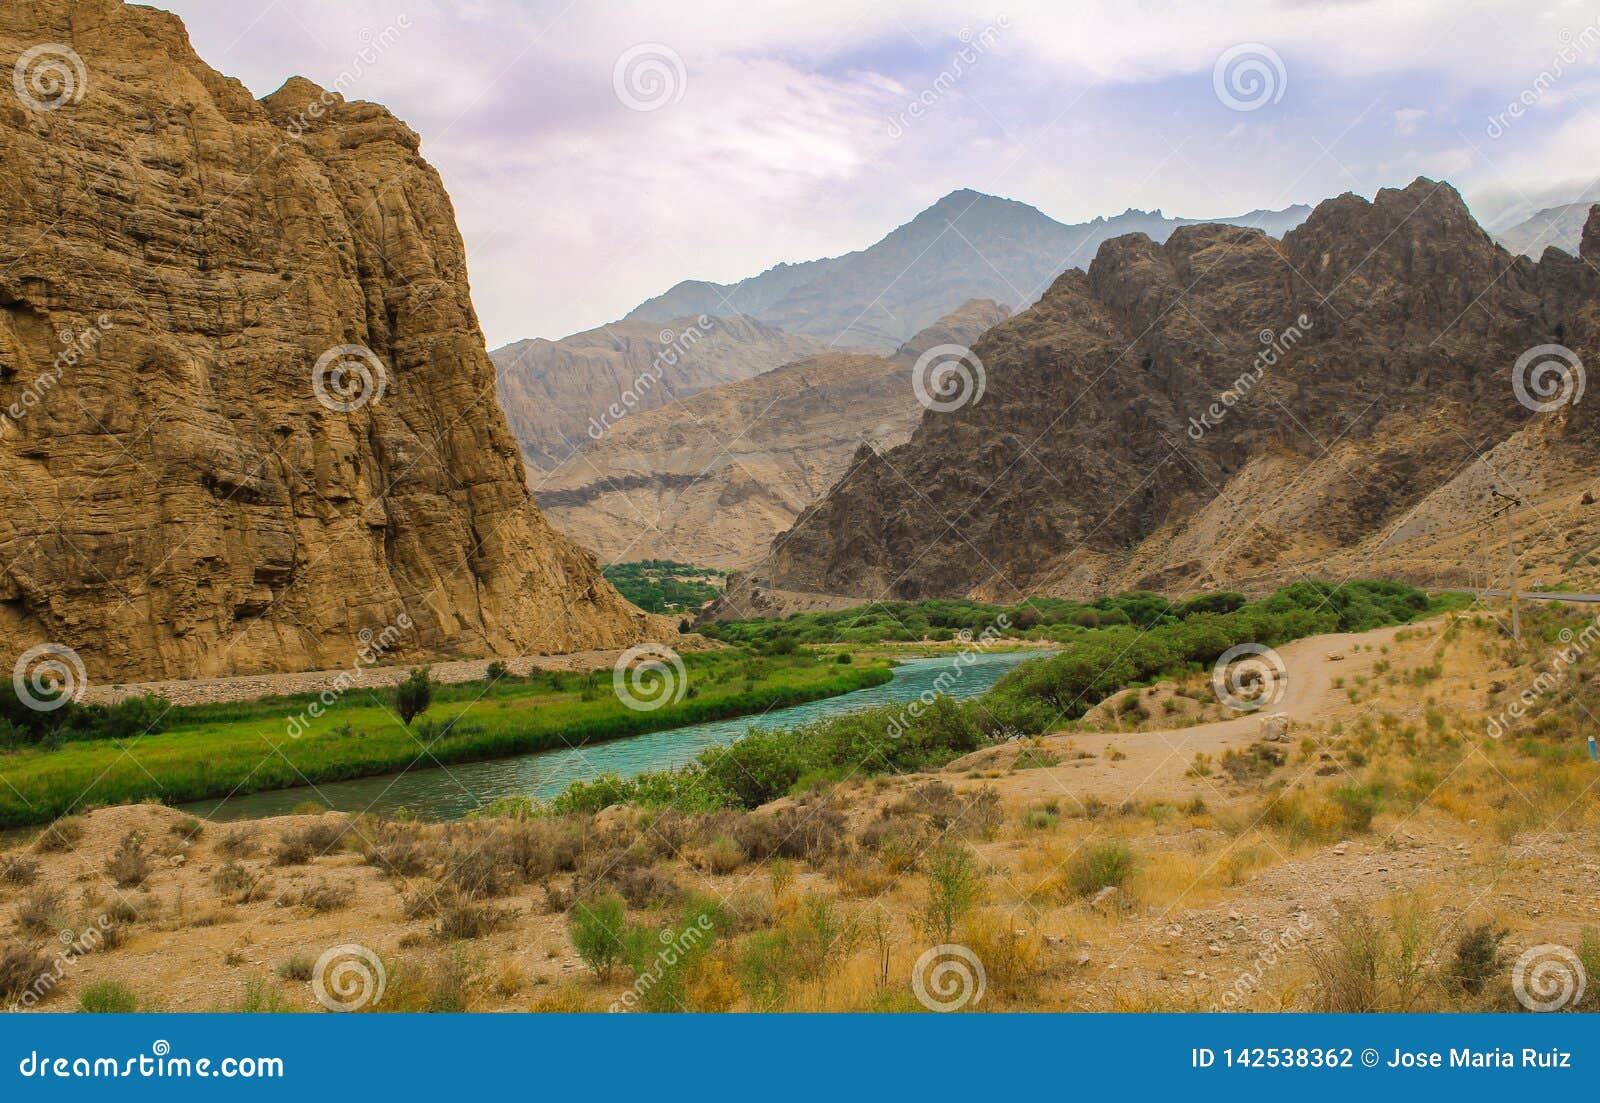 valley in north iran near the border with armenia and azerbaiyan, desert with a river and grass